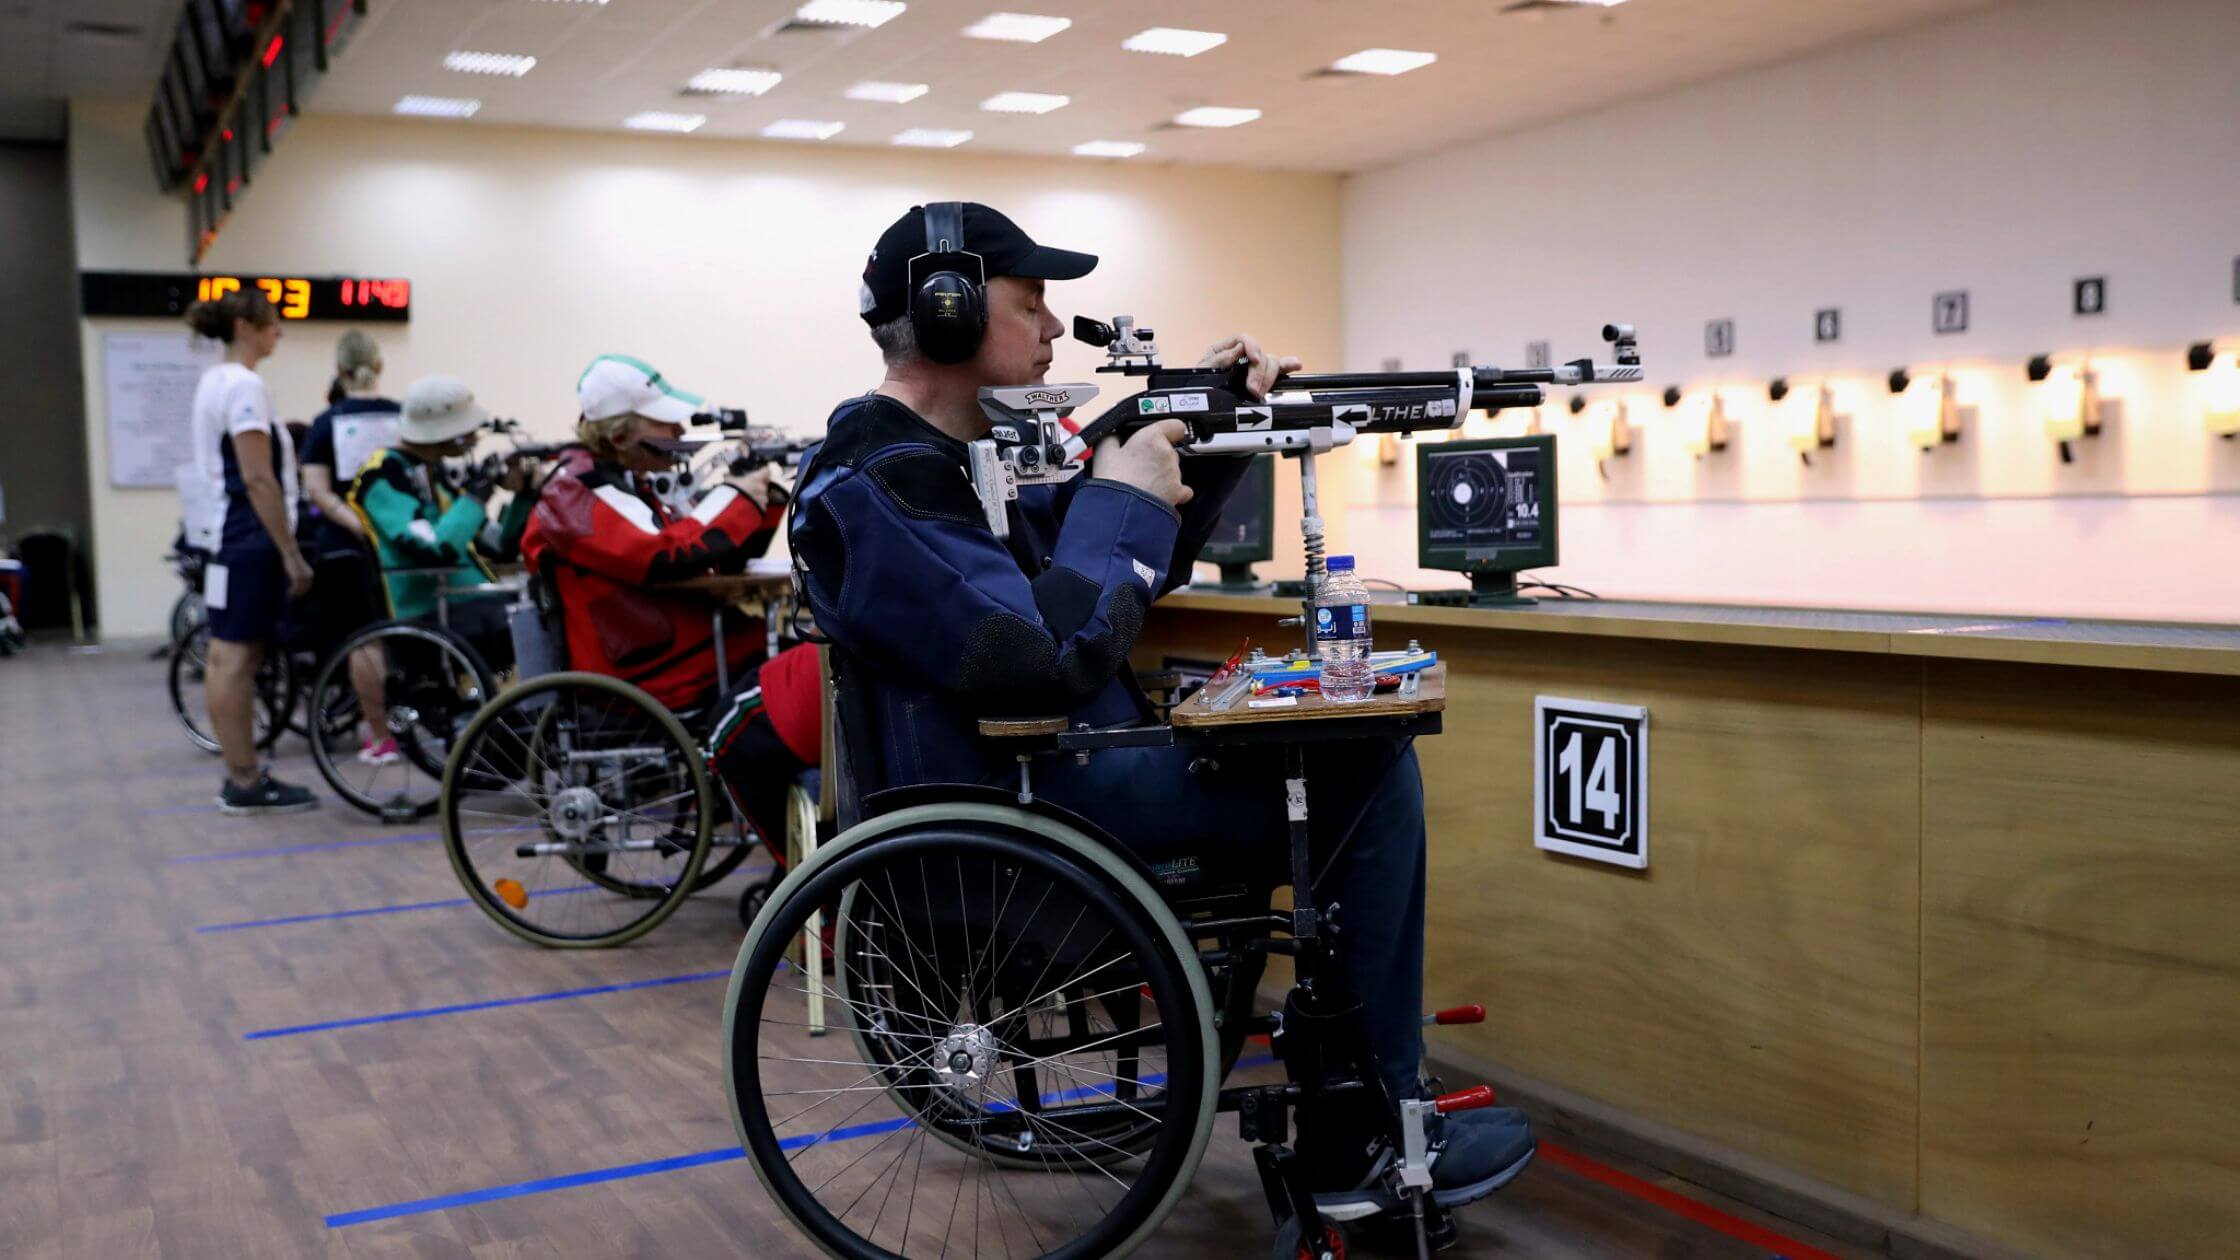 MENA's First Paralympic Shooting World Championships To Be Held In Abu Dhabi In 2022